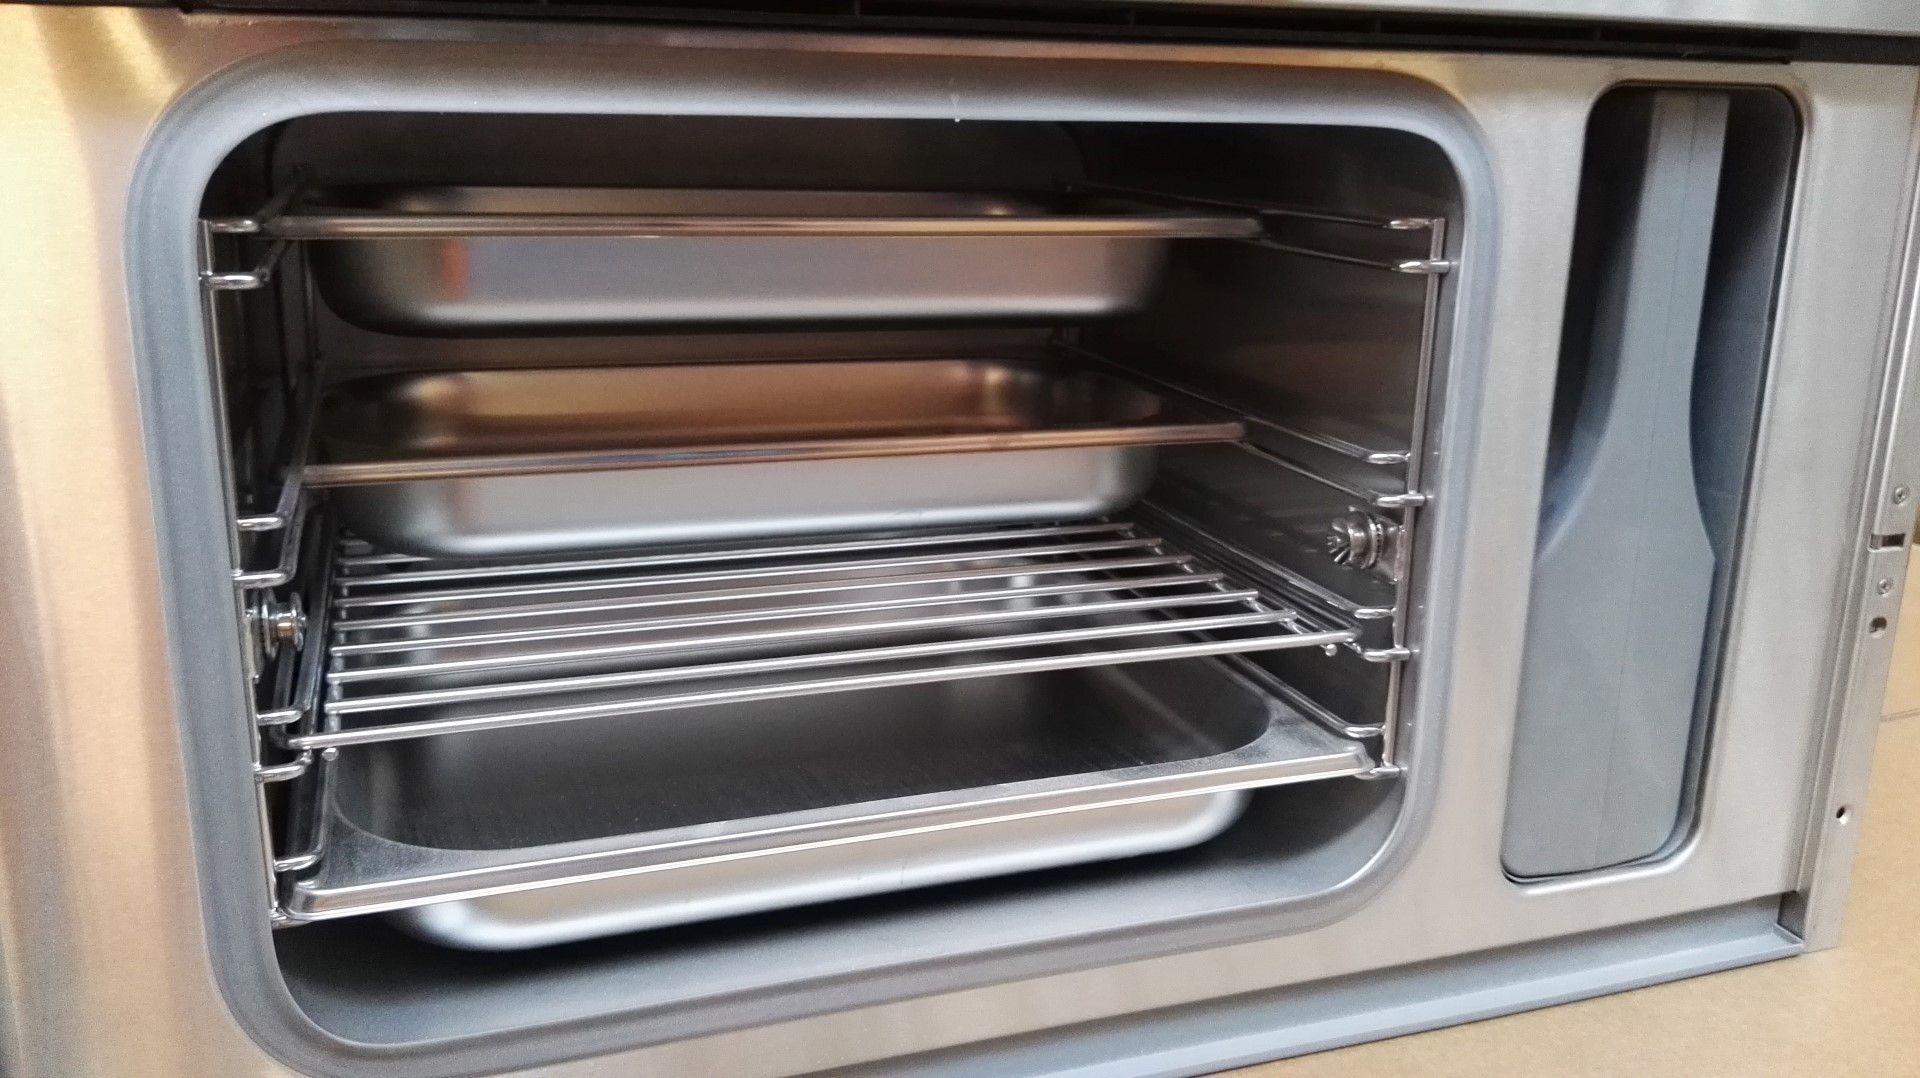 1 x Miele DG2661 60cm Wide Built-in Steam Oven - Unused Condition - CL283 - Location: Altrincham - Image 12 of 13